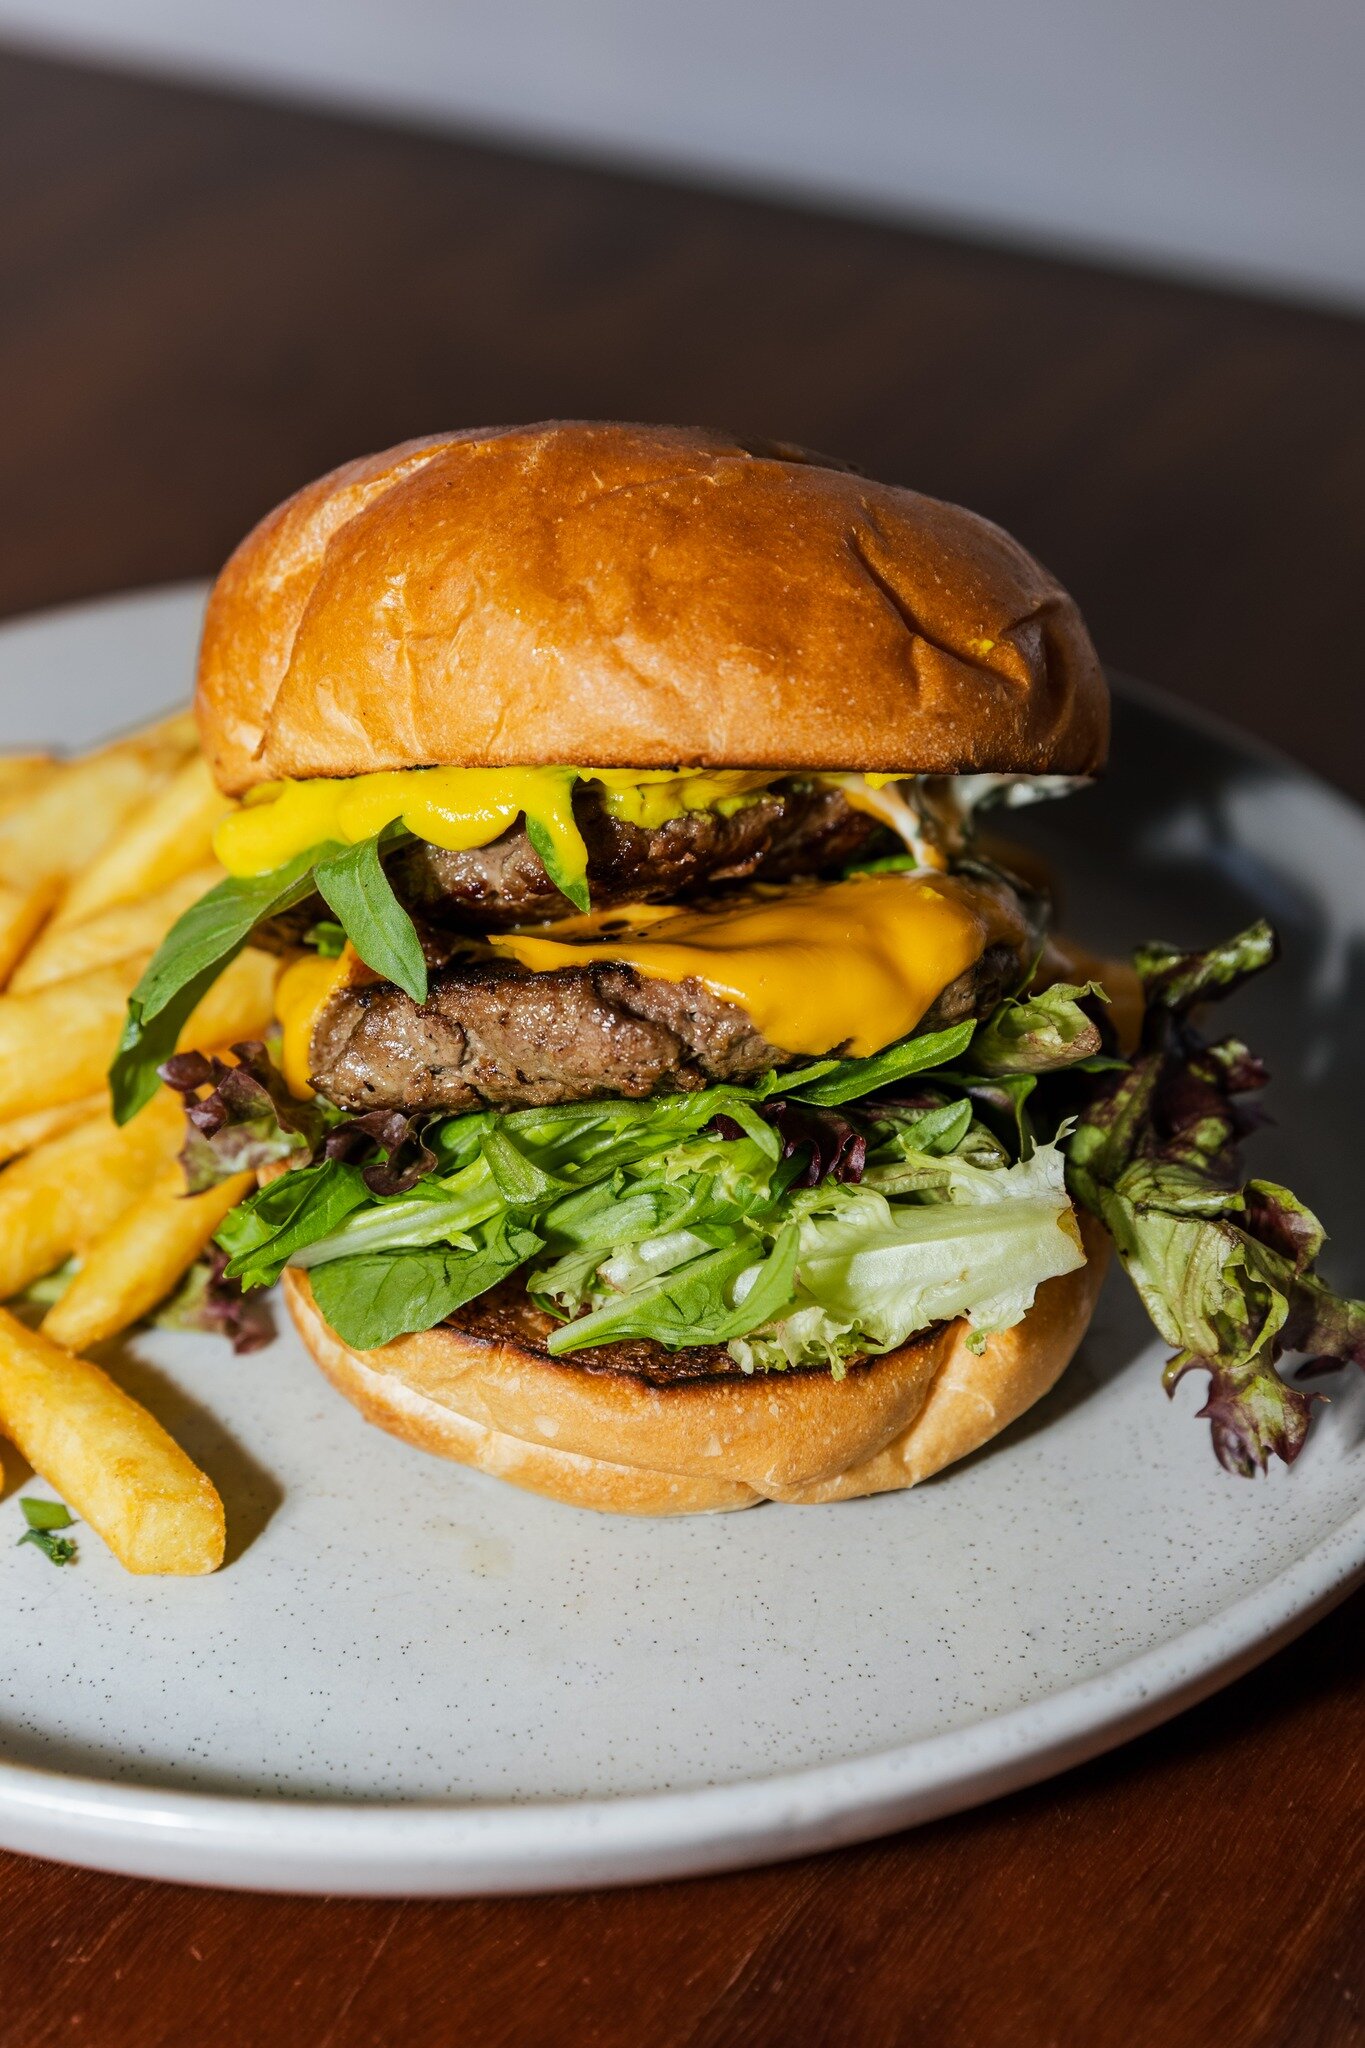 Welcome to the weekend 🍔

Book here 👉 www.challagardenshotel.com.au